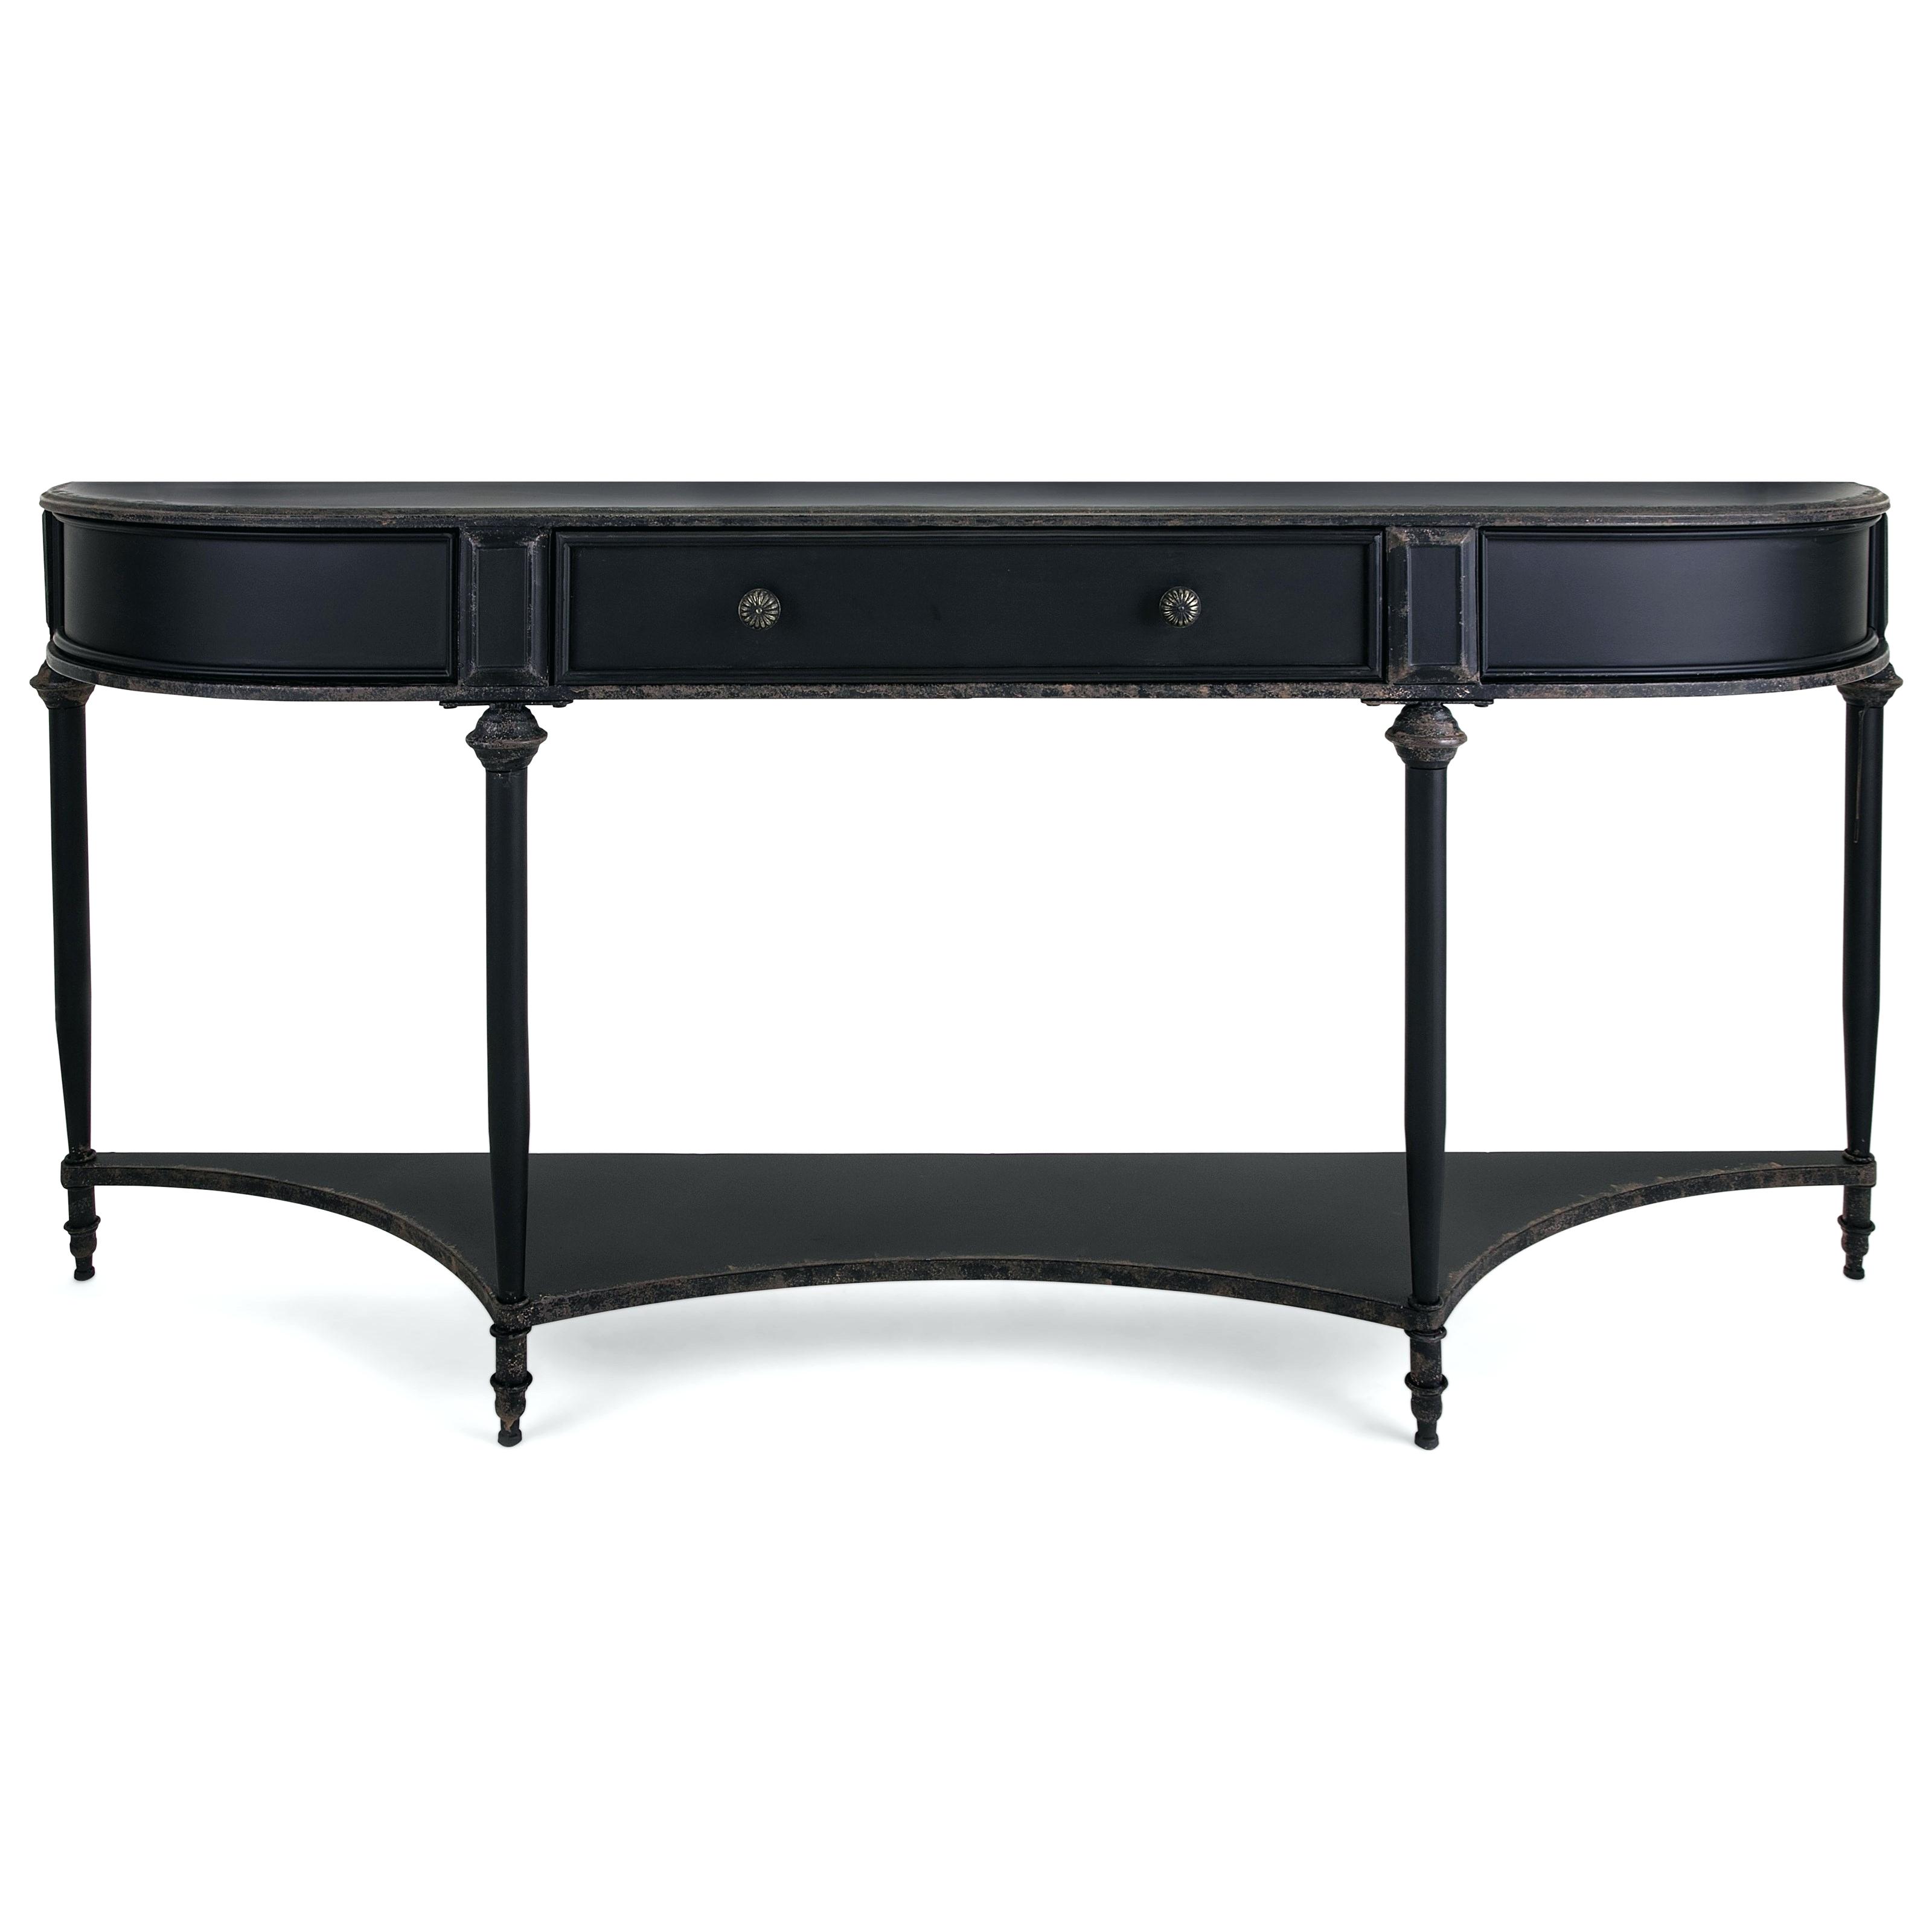 console accent tables corner worldwide home and cabinets black metal with drawer beach chairs spanish structube coffee table pottery barn square antique wooden pedestal end sets